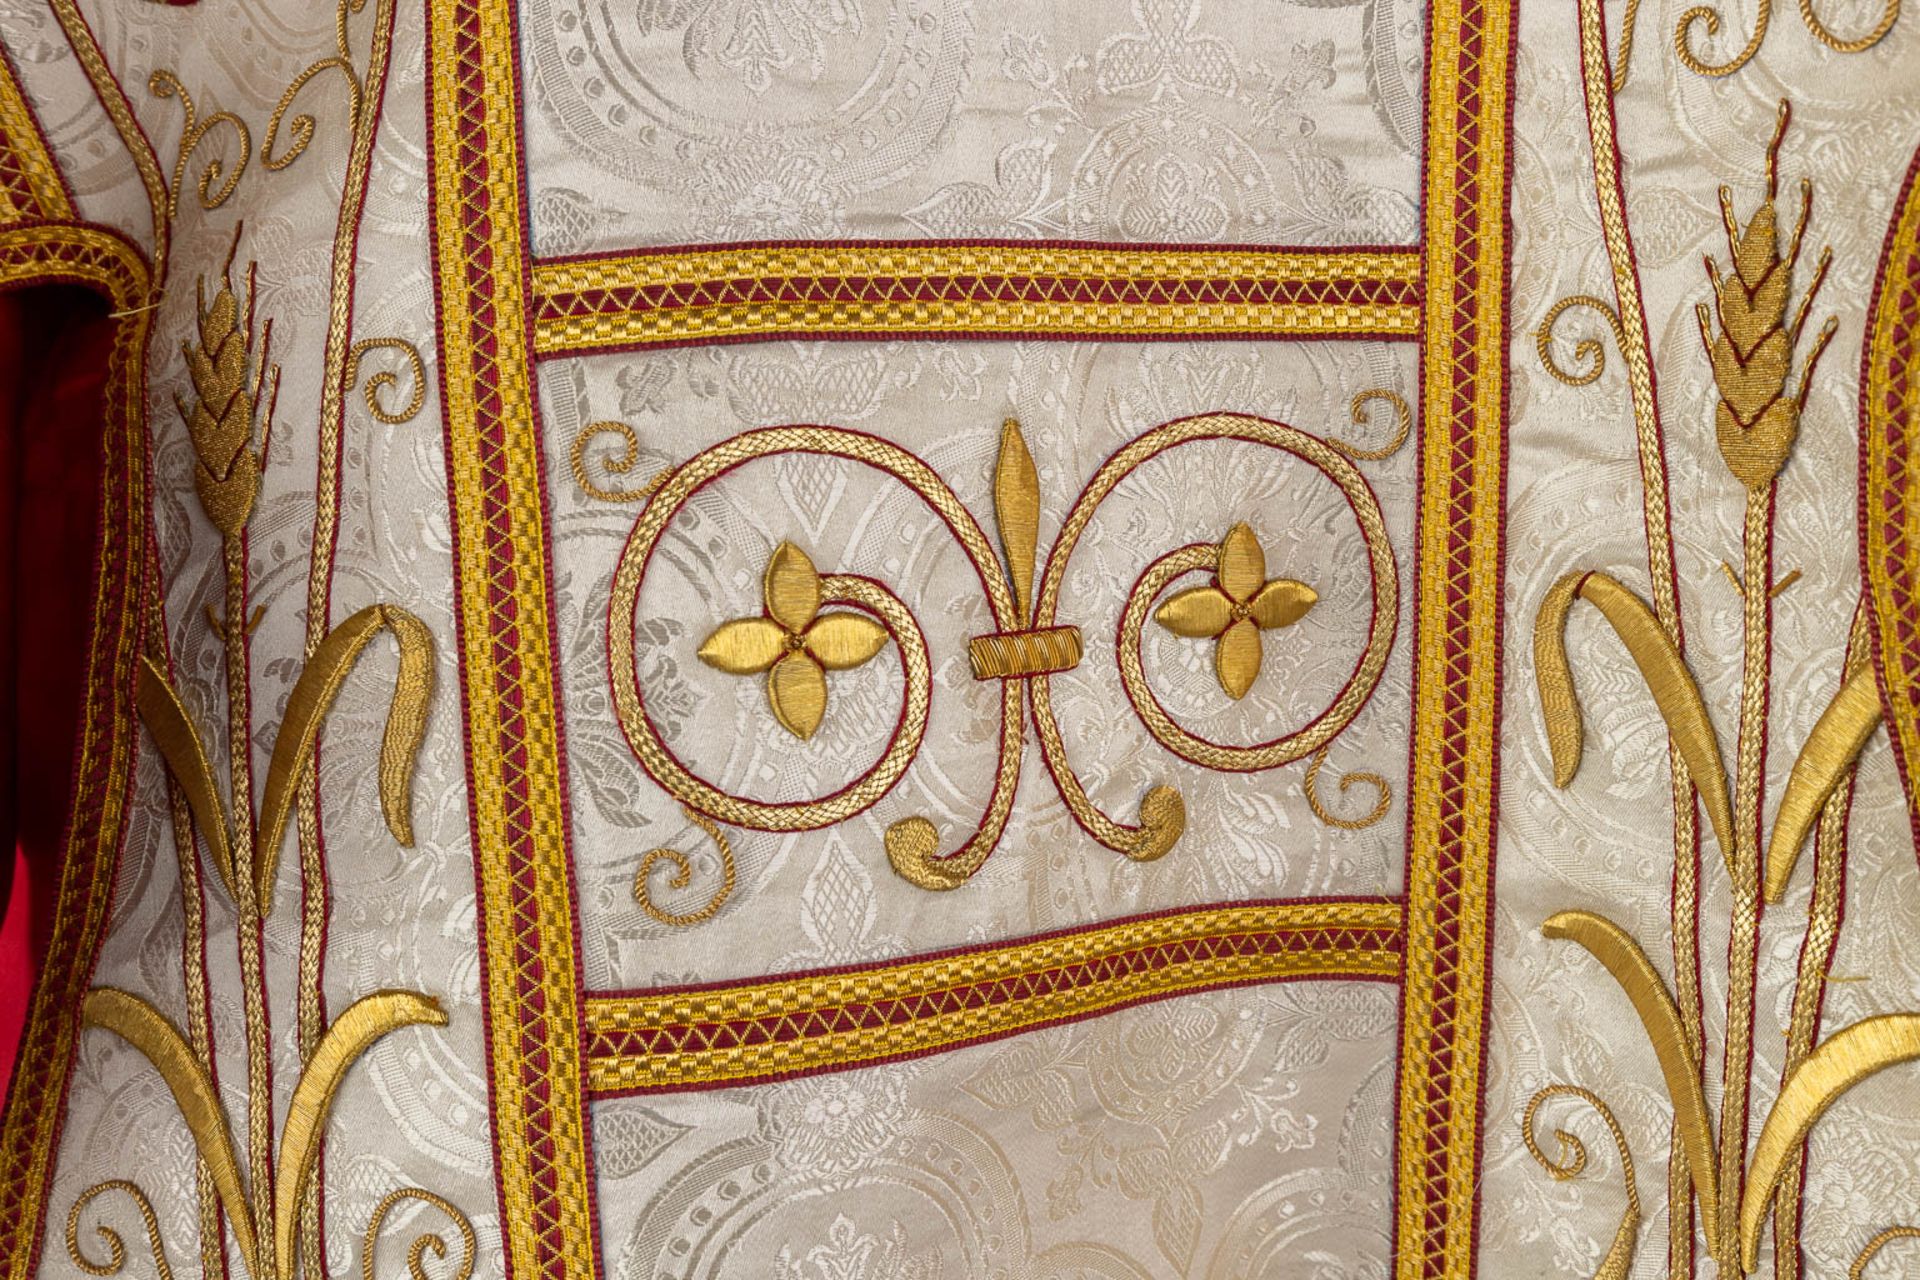 A matching set of Liturgical robes, 4 dalmatics, maniples and stola. - Image 7 of 17